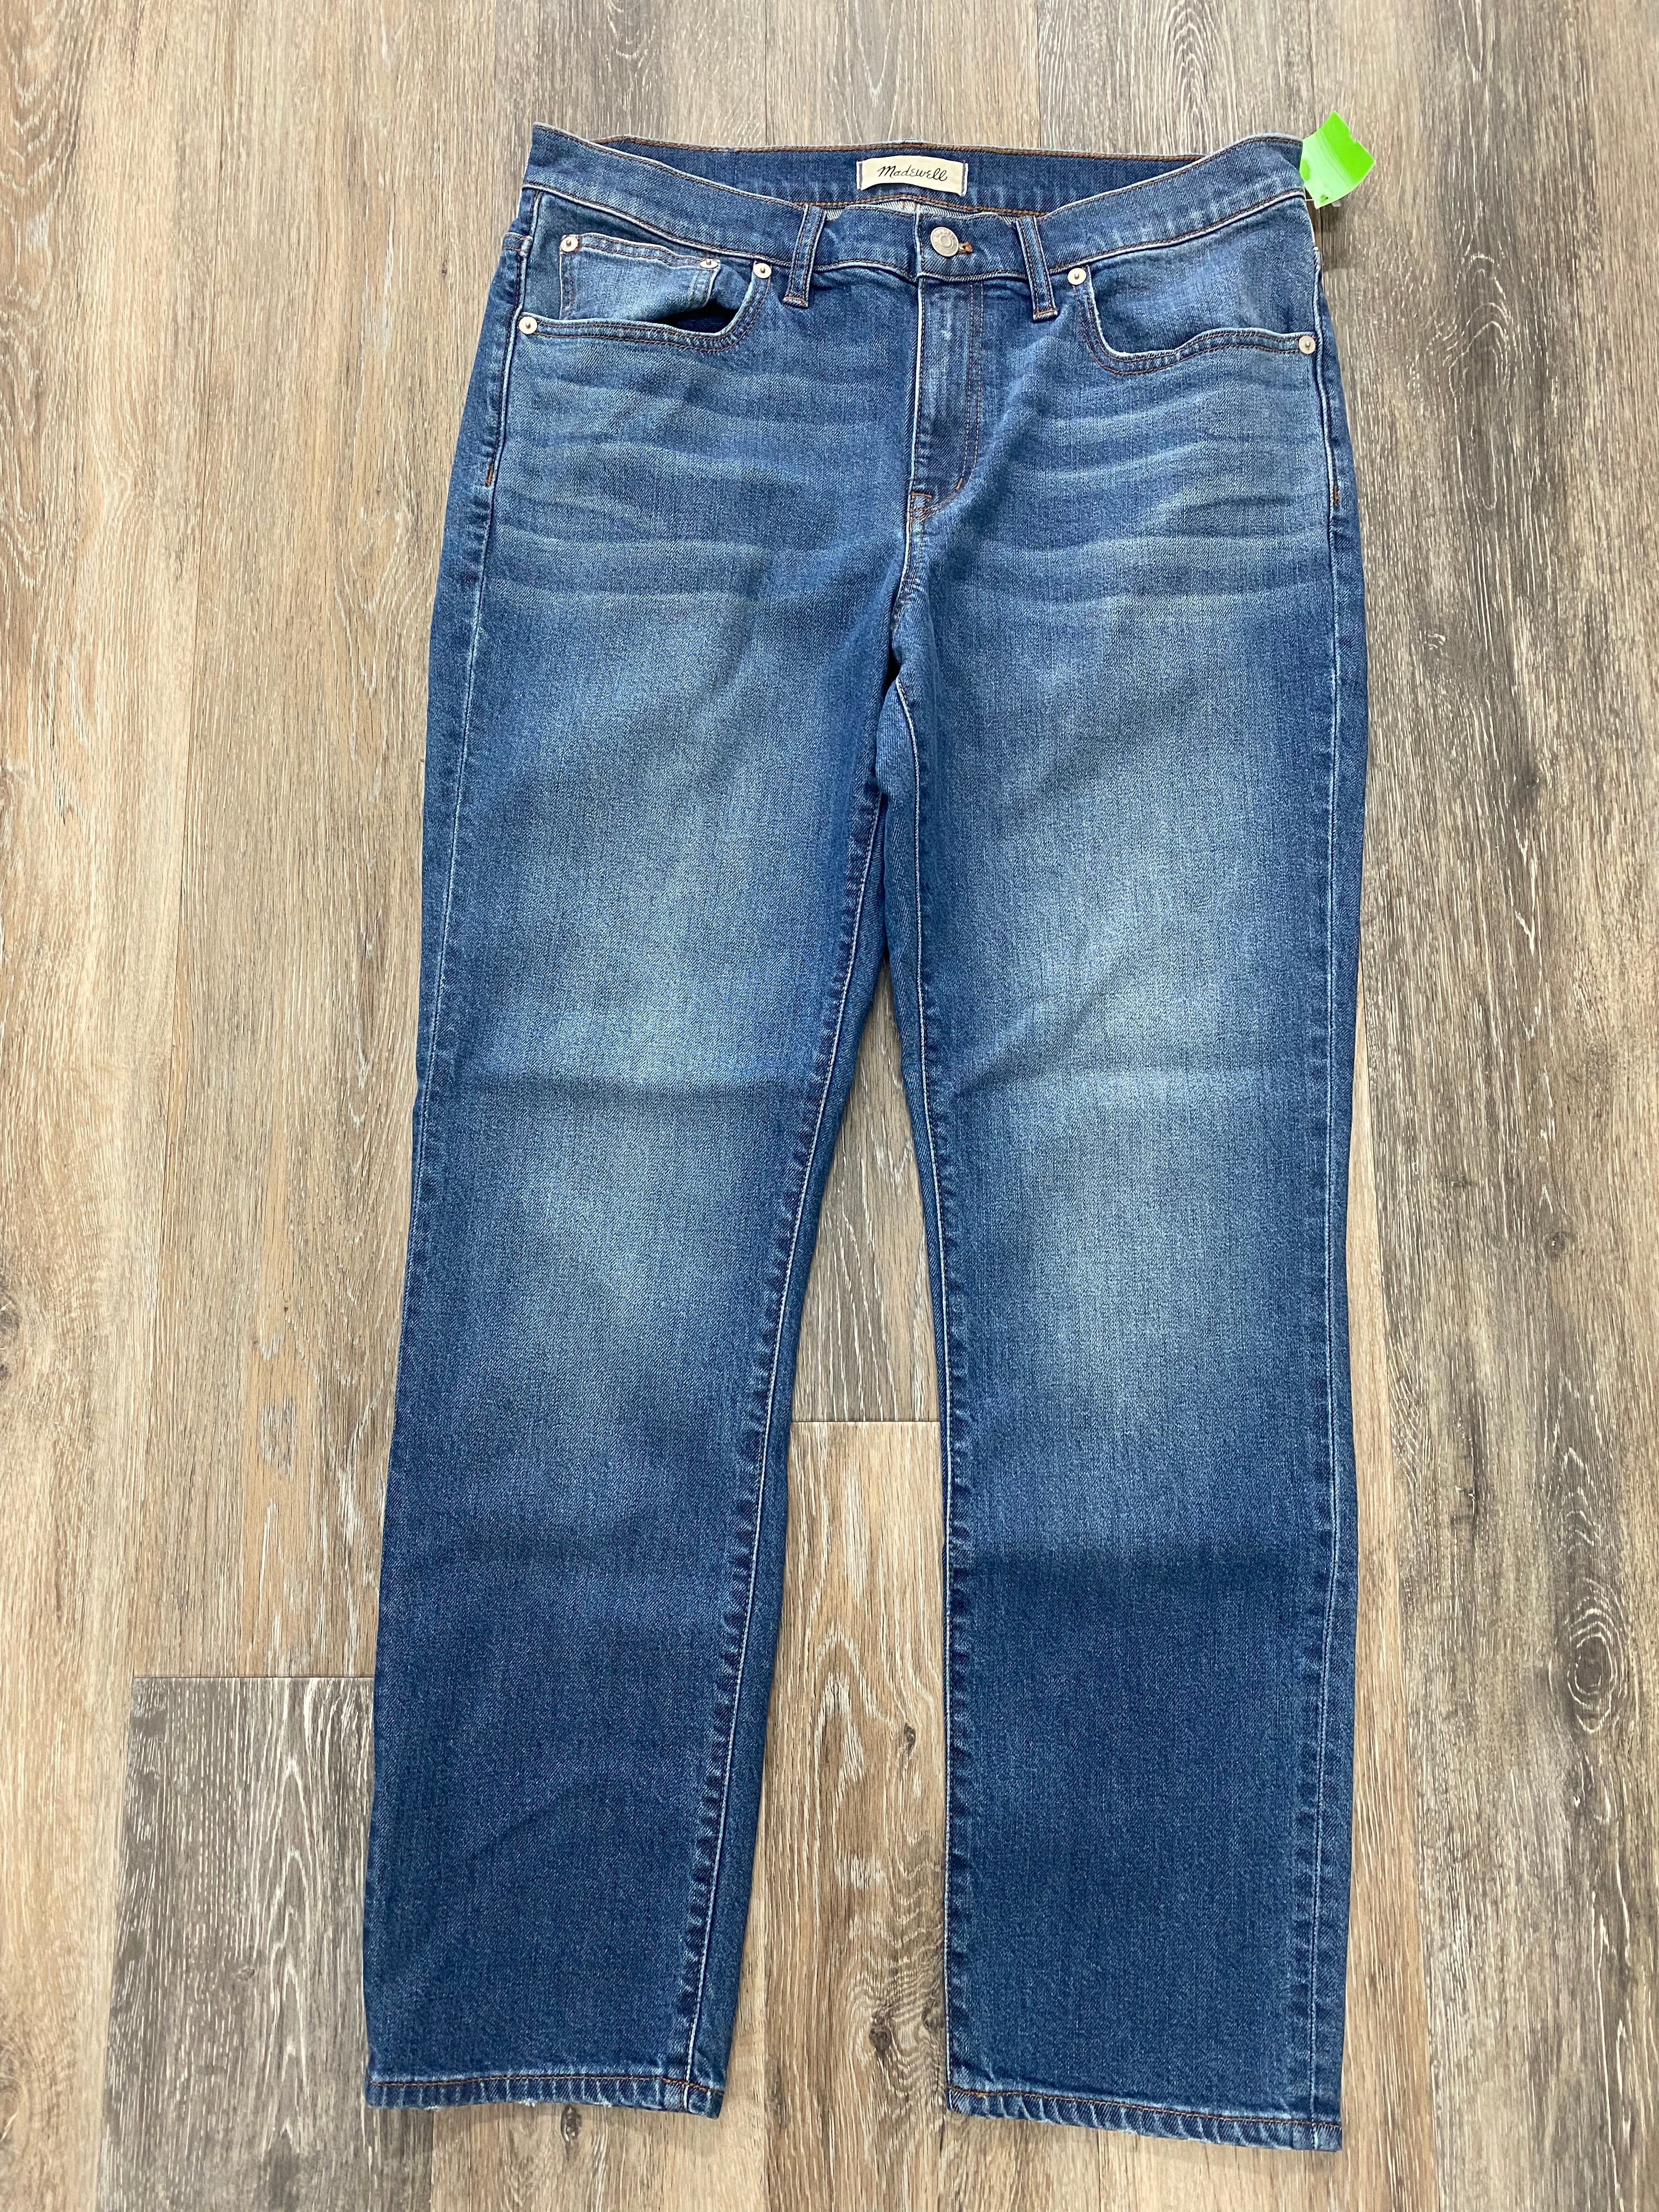  Primary Photo - BRAND: MADEWELL <BR>STYLE: JEANS <BR>COLOR: DENIM <BR>SIZE: 8 <BR>SKU: 137-137158-28463